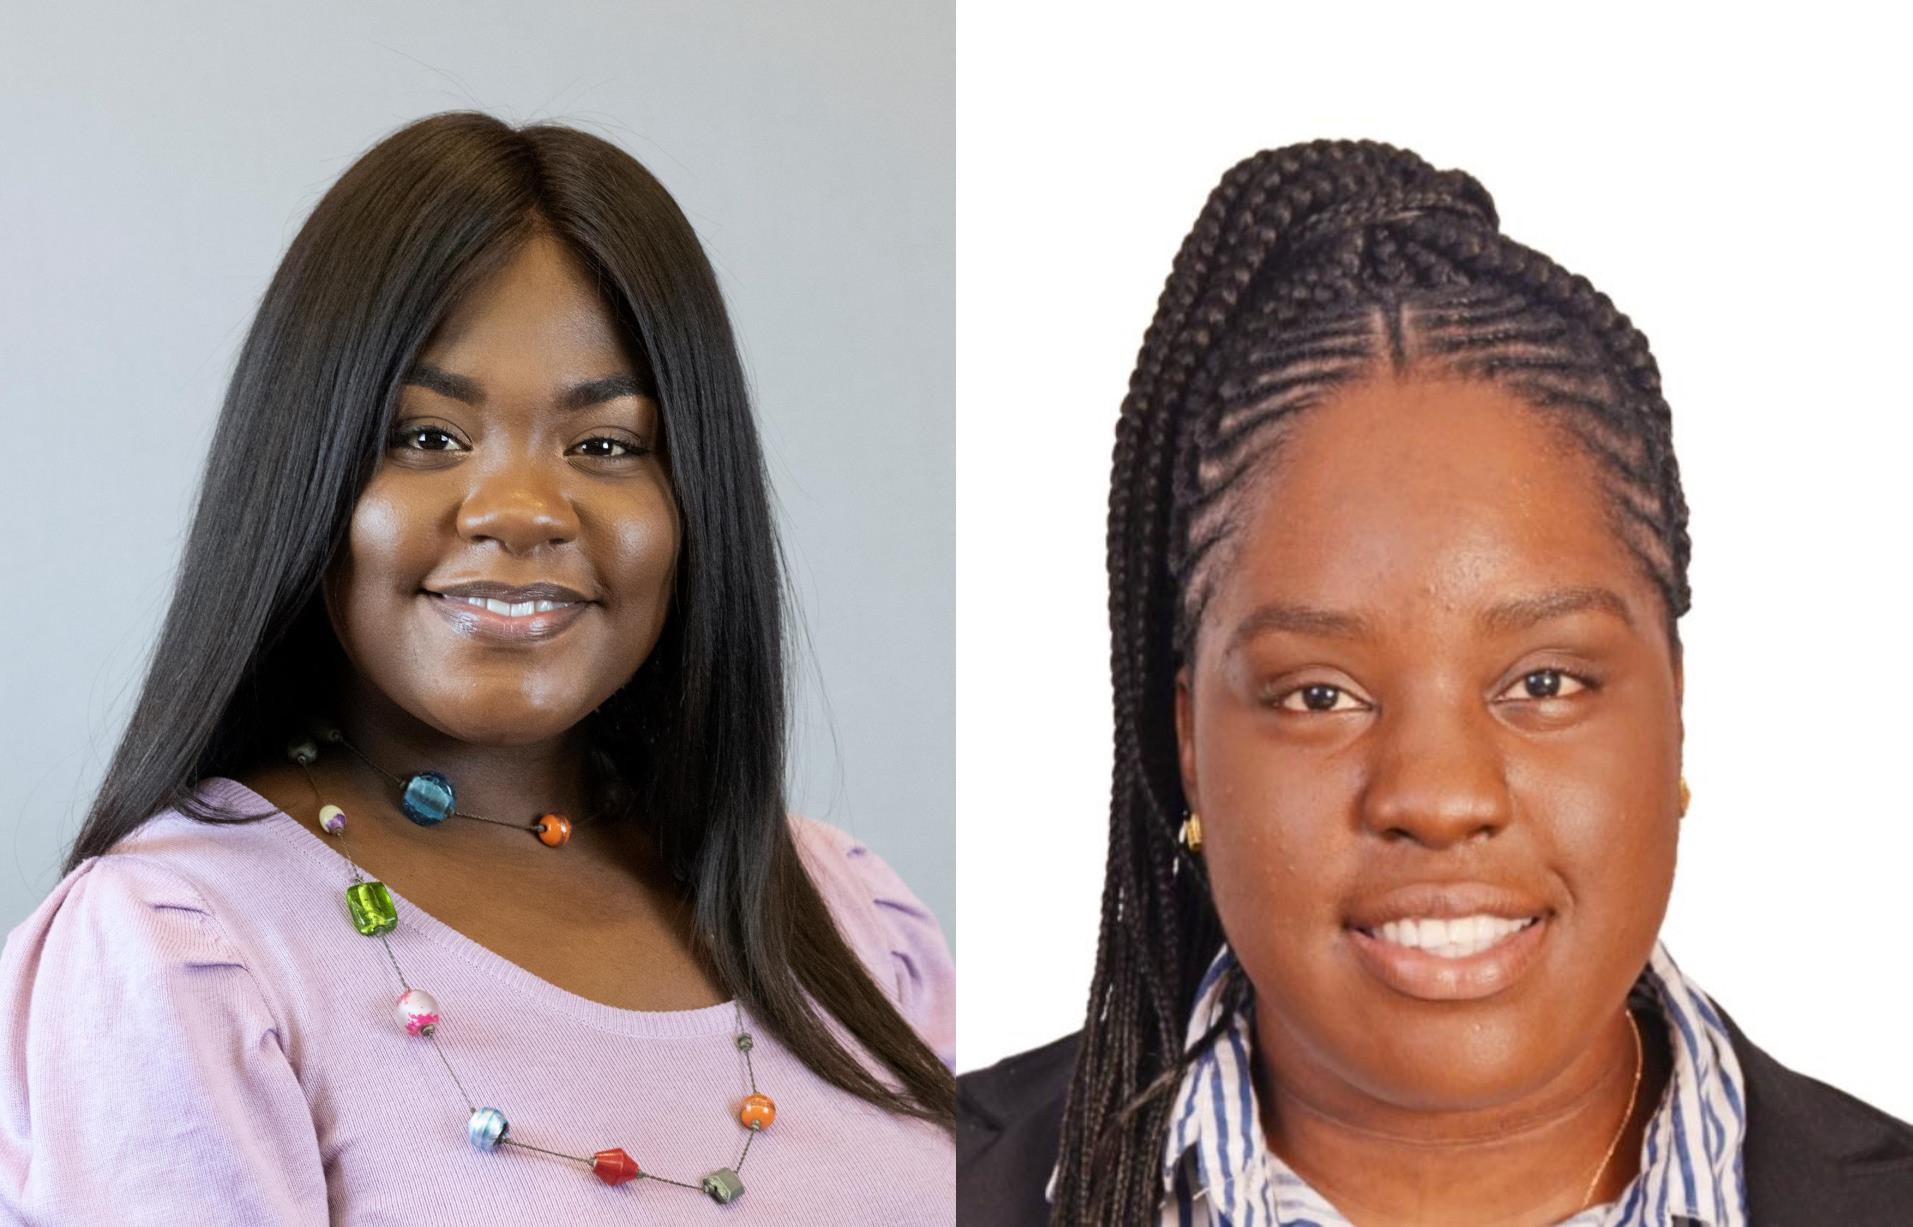 UVI Students Awarded Record Number of National Title III Scholarships